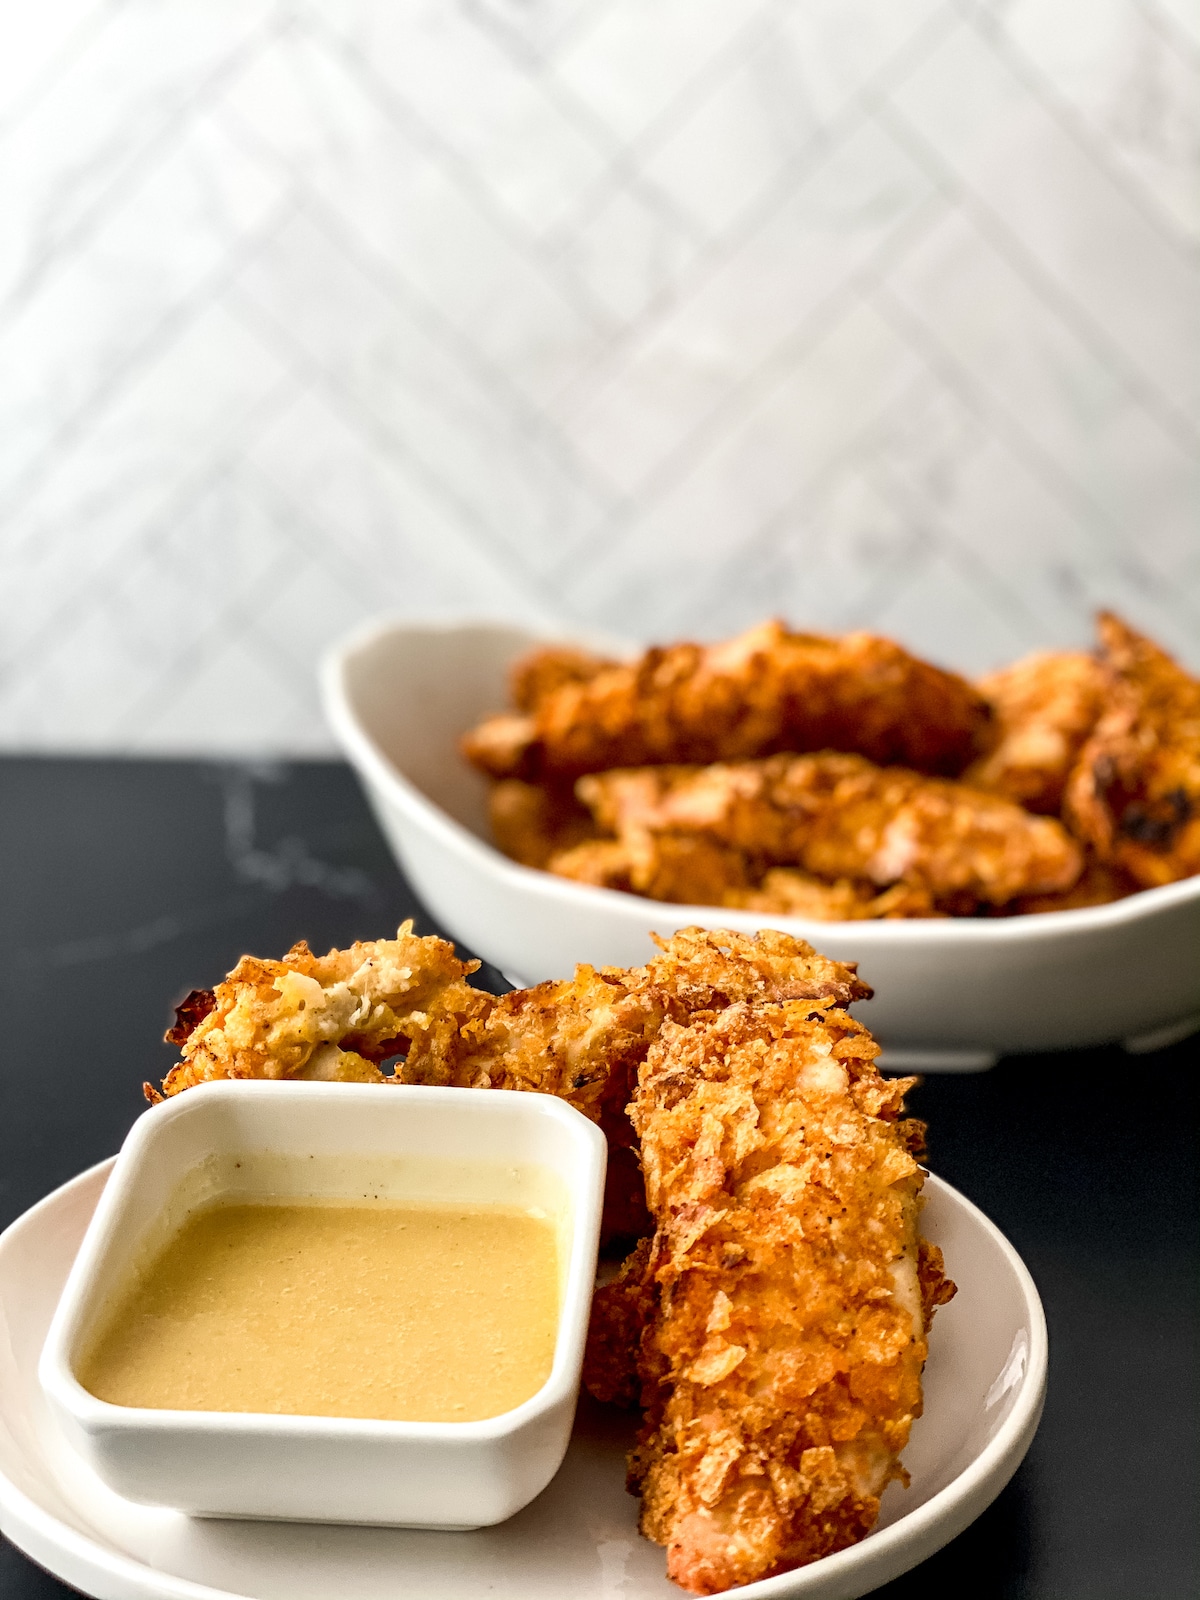 Chicken tenders in large white bowl in front of tile background